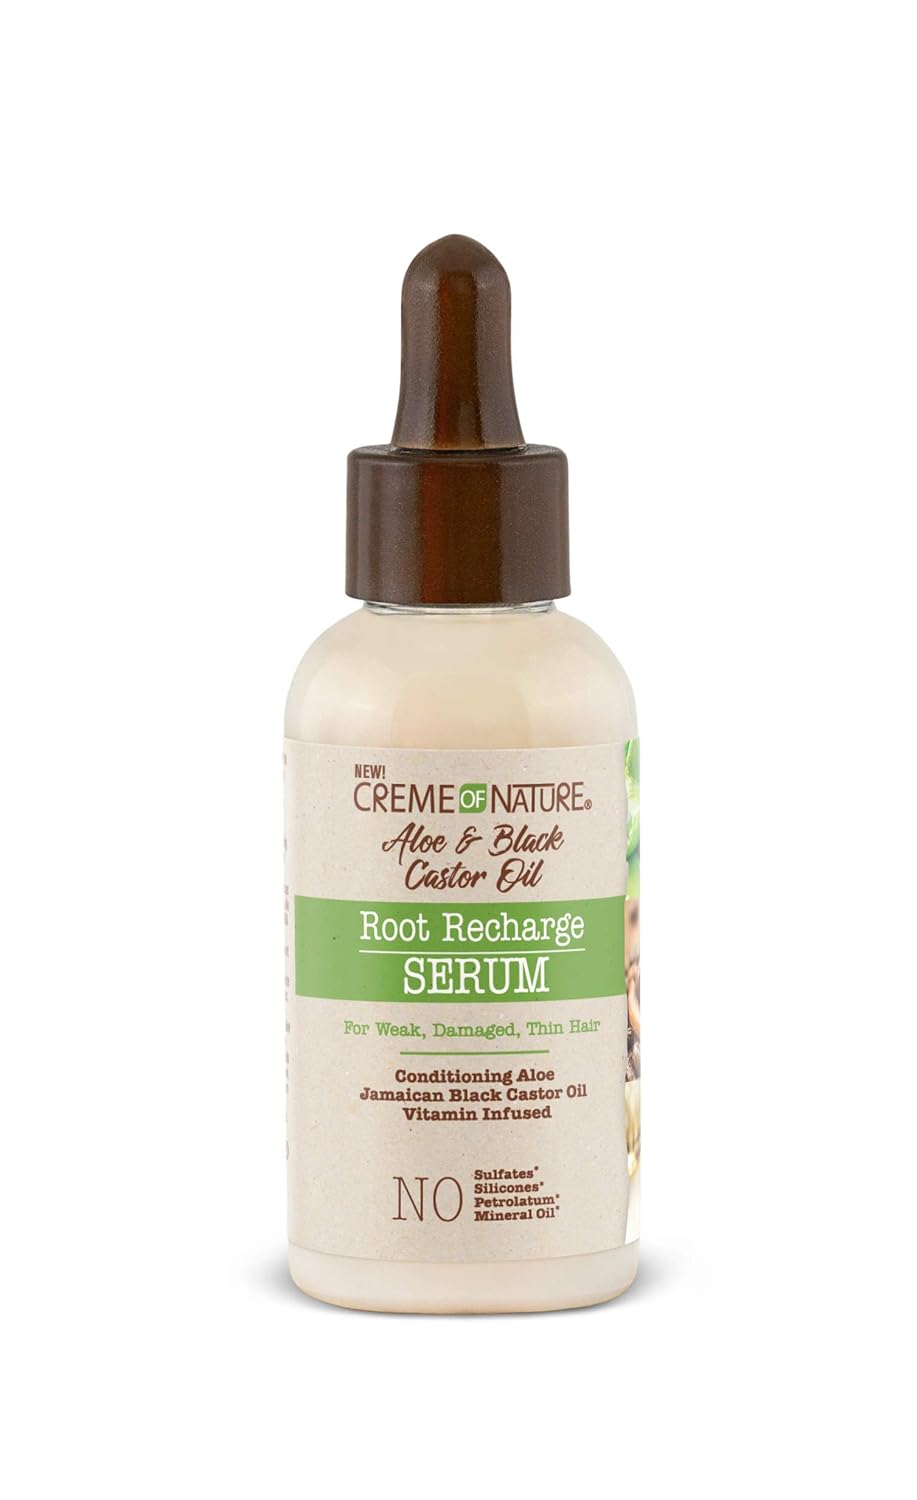 Root Recharge Serum by Creme of Nature, Aloe & Black Castor 